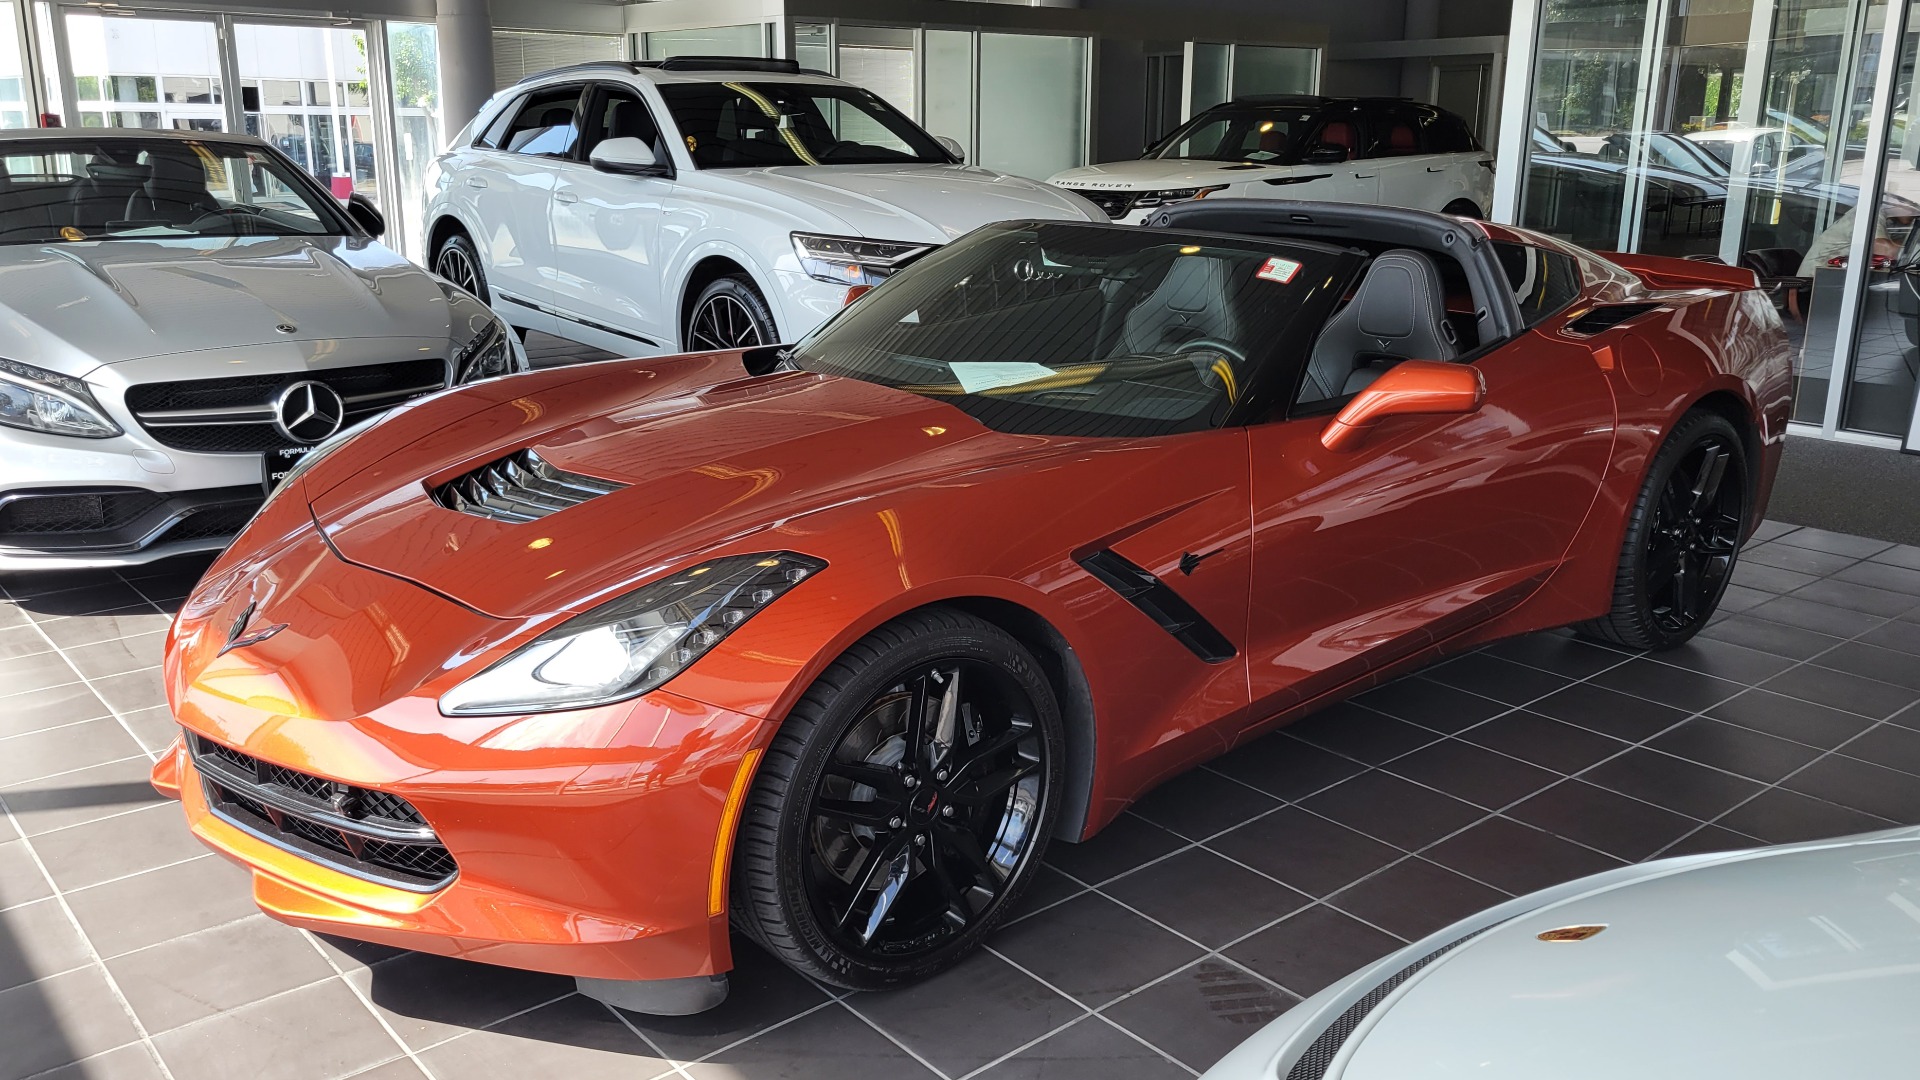 Used 2016 Chevrolet CORVETTE C7 COUPE / Z51 / 2LT / NAV / AUTO / PERF DATA & VIDEO RECORDER for sale $56,495 at Formula Imports in Charlotte NC 28227 1